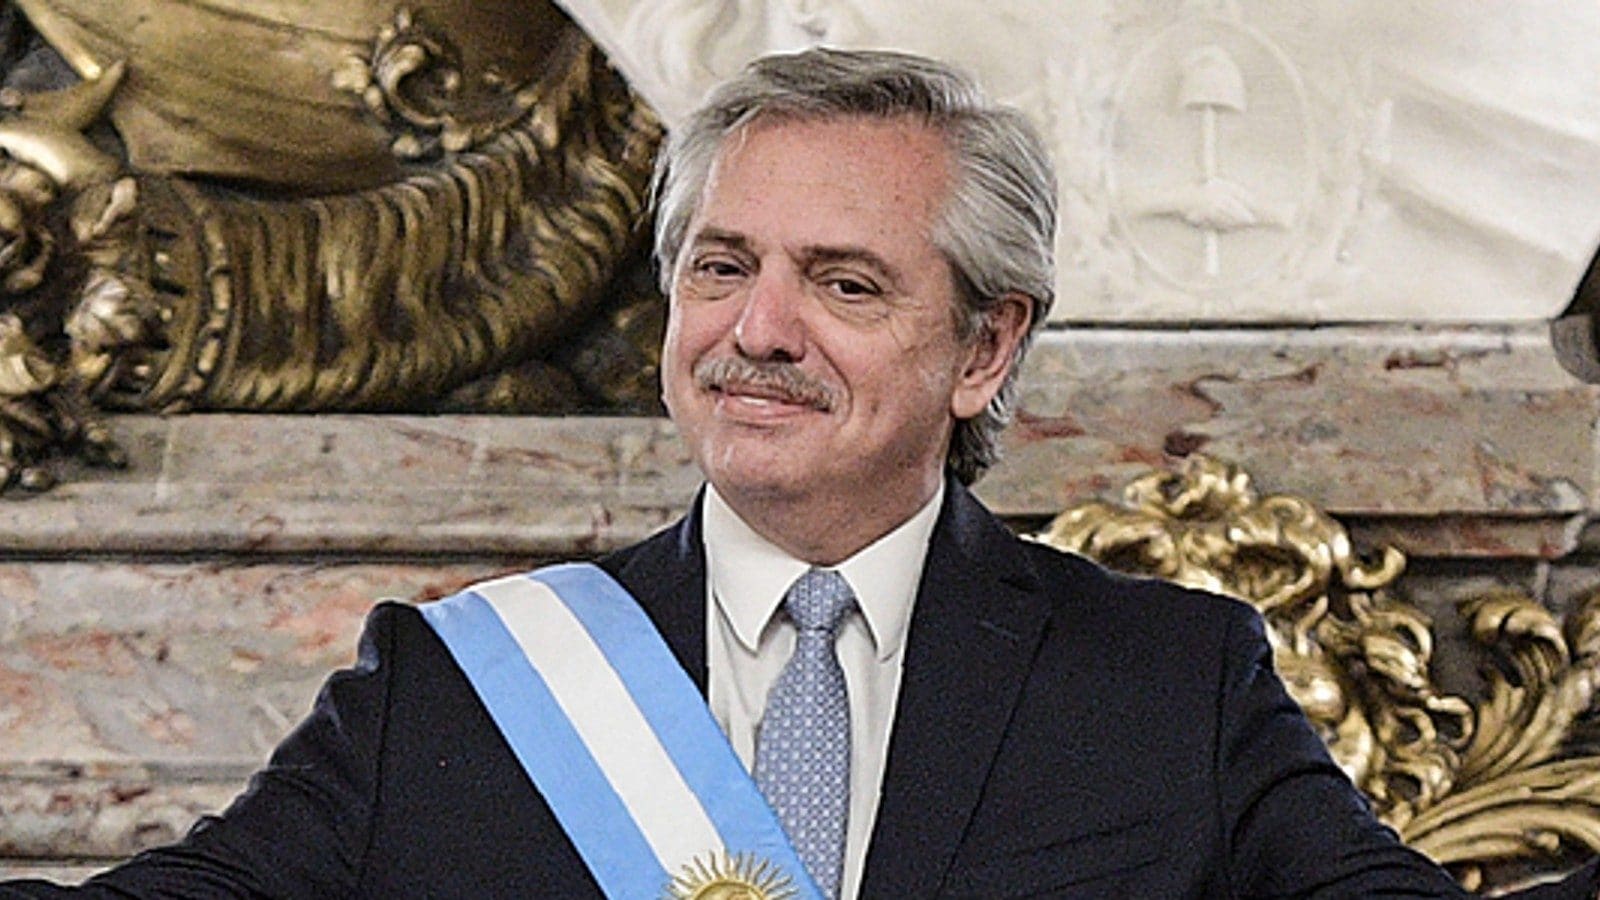 Argentine President Alberto Fernandez to Cheer for National Team From Home